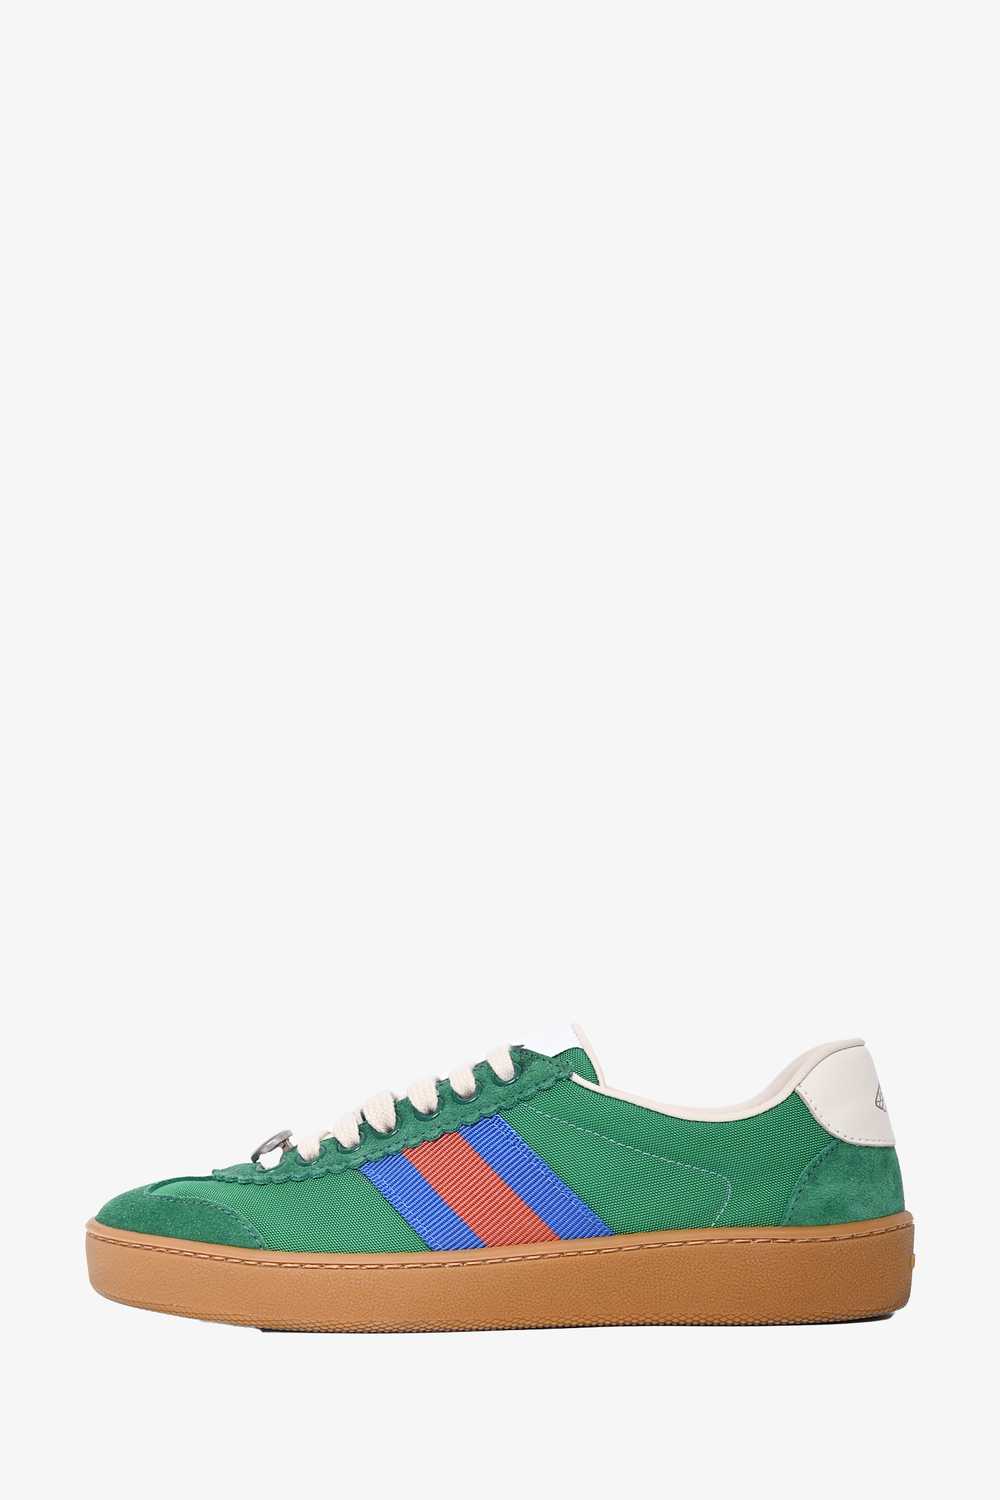 Gucci Green Web Accent Sneakers Size 35 - image 4